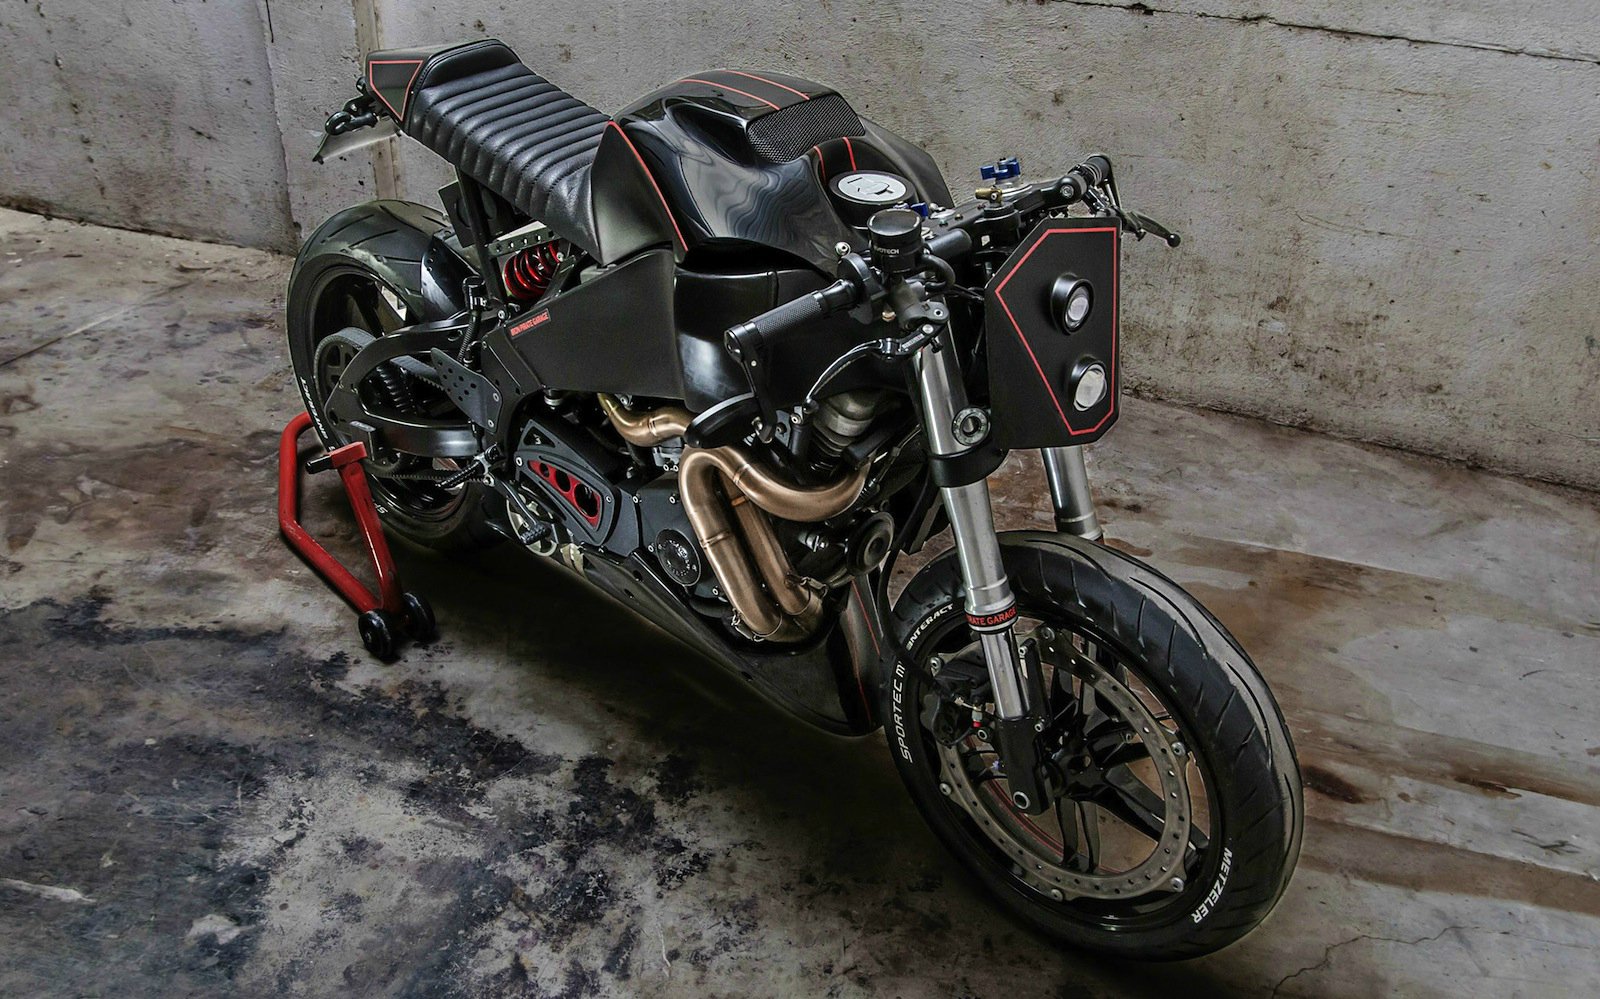 Buell XB9 Cafe Racer by IRON Pirate Garage | HiConsumption